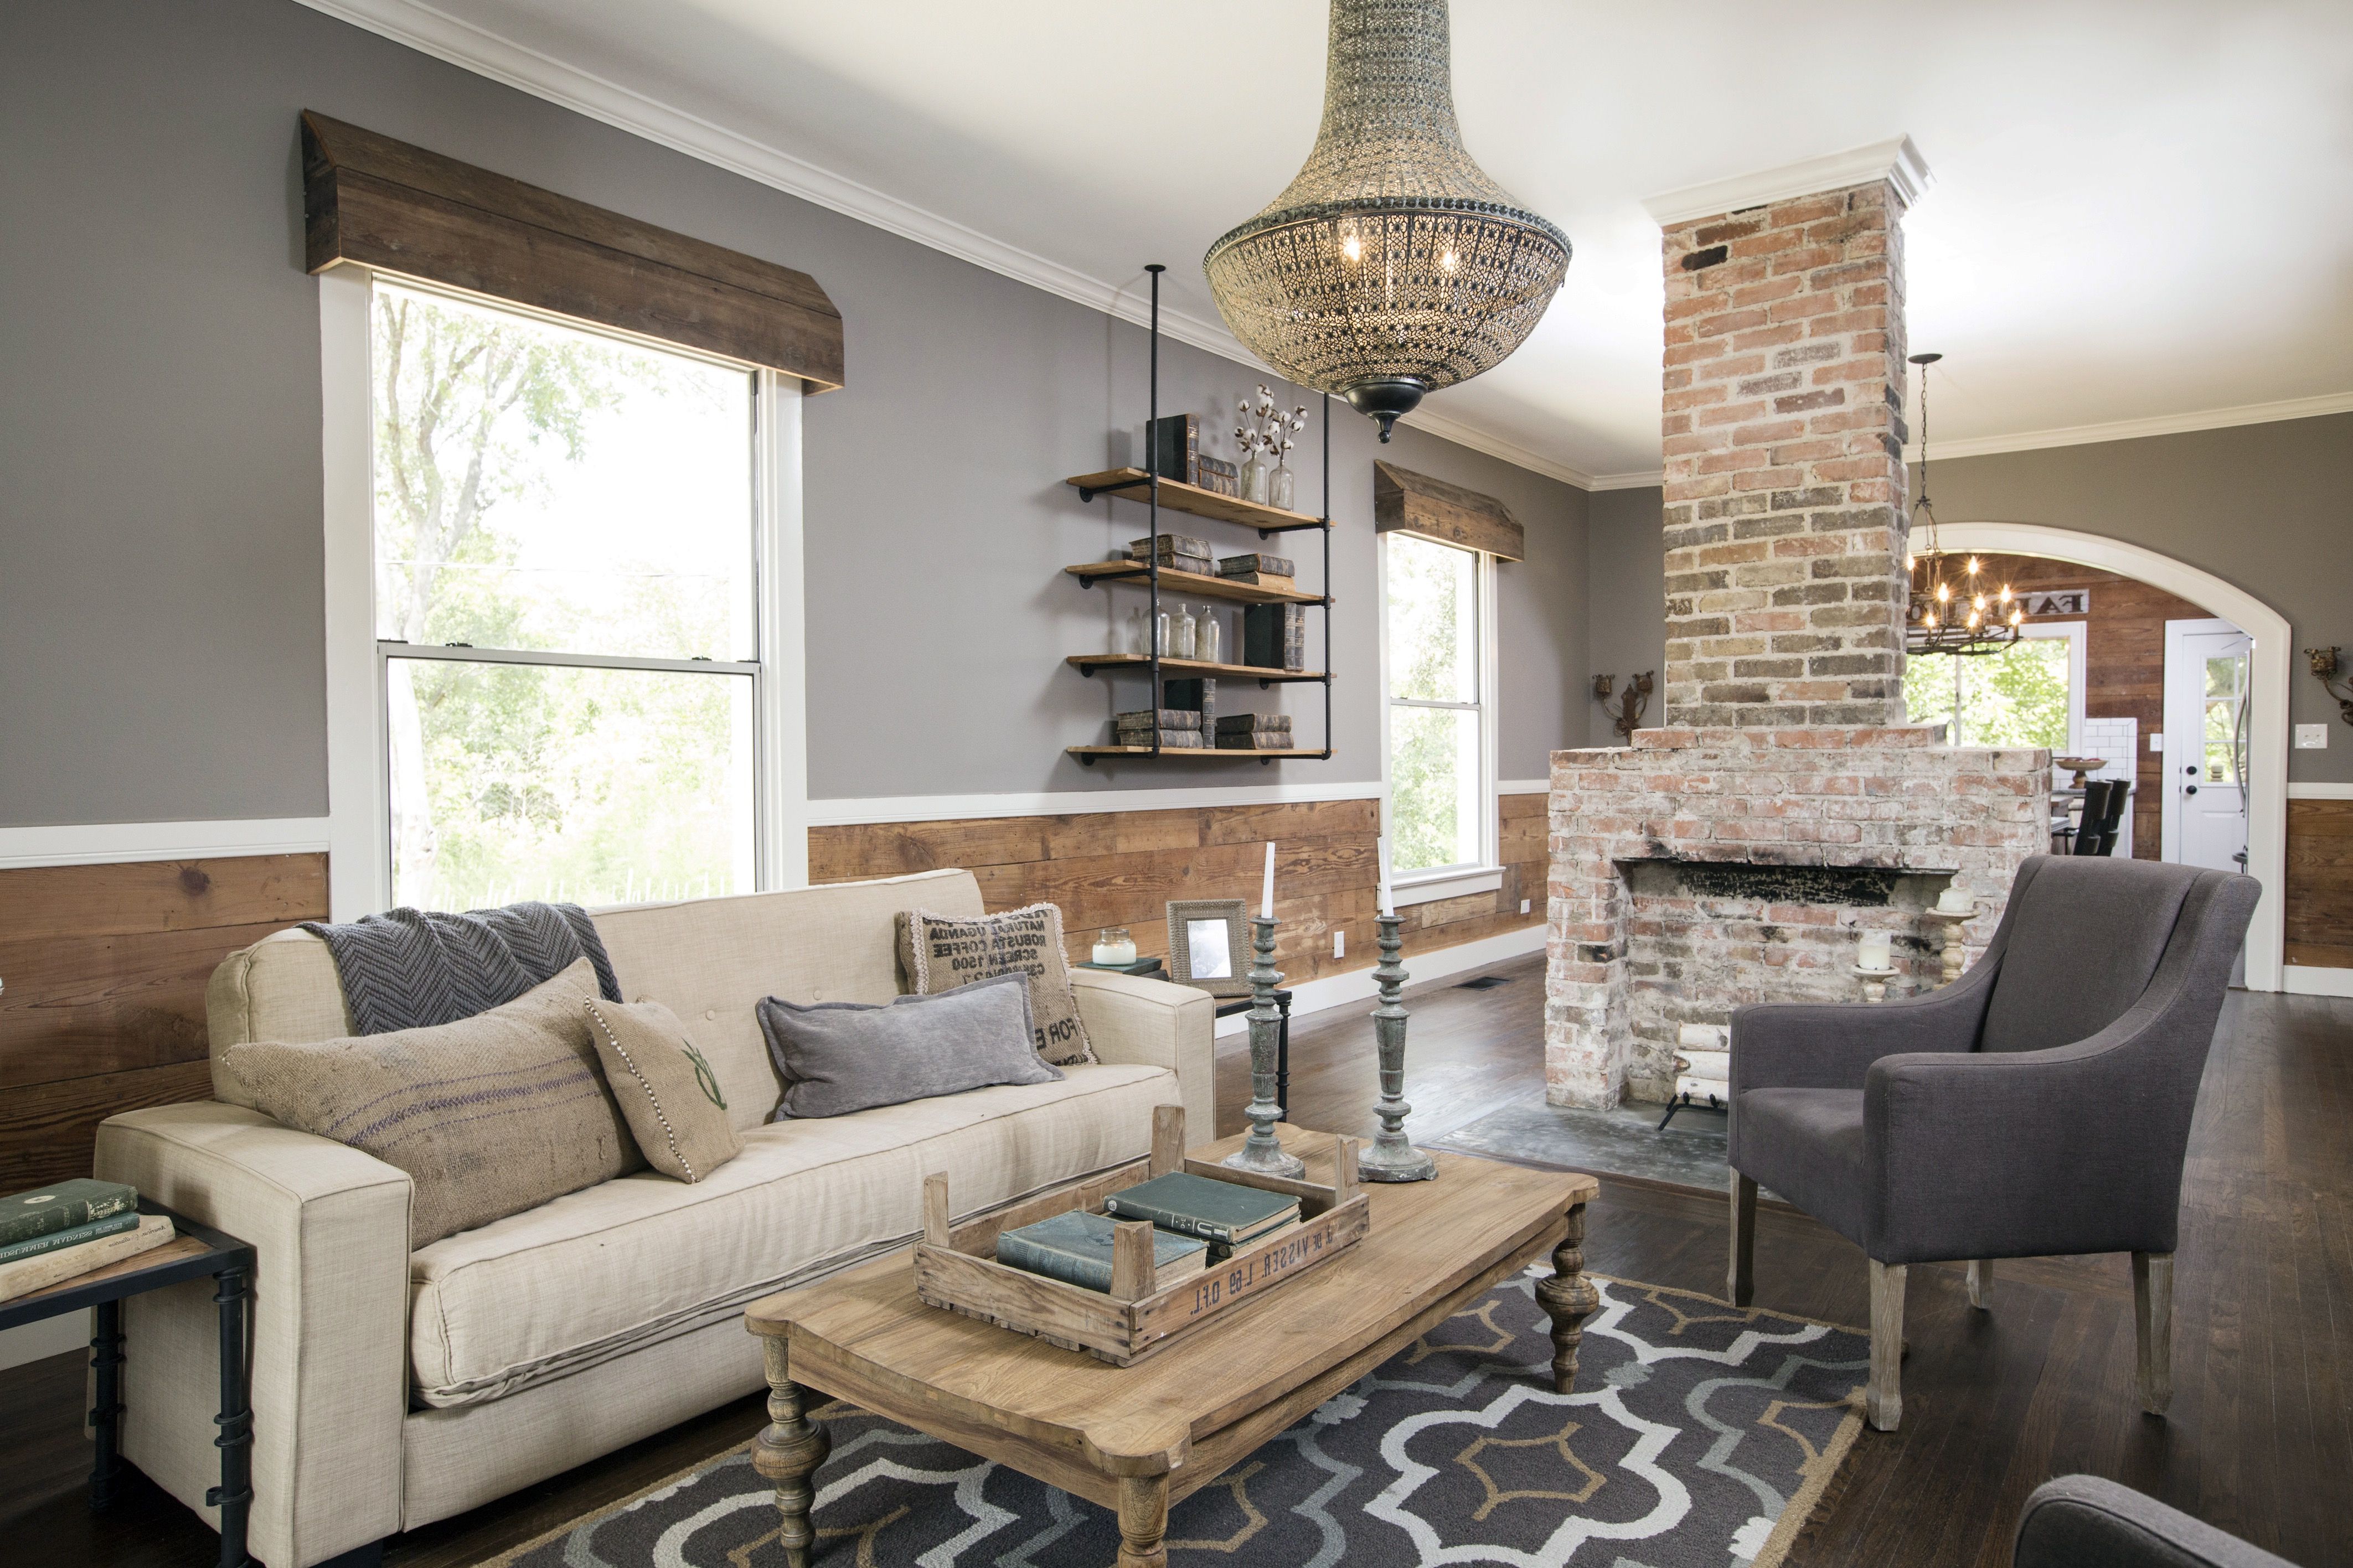 Rustic Chic Living Room With Natural Wood Paneling And Exposed Brick Fireplace (View 31 of 36)